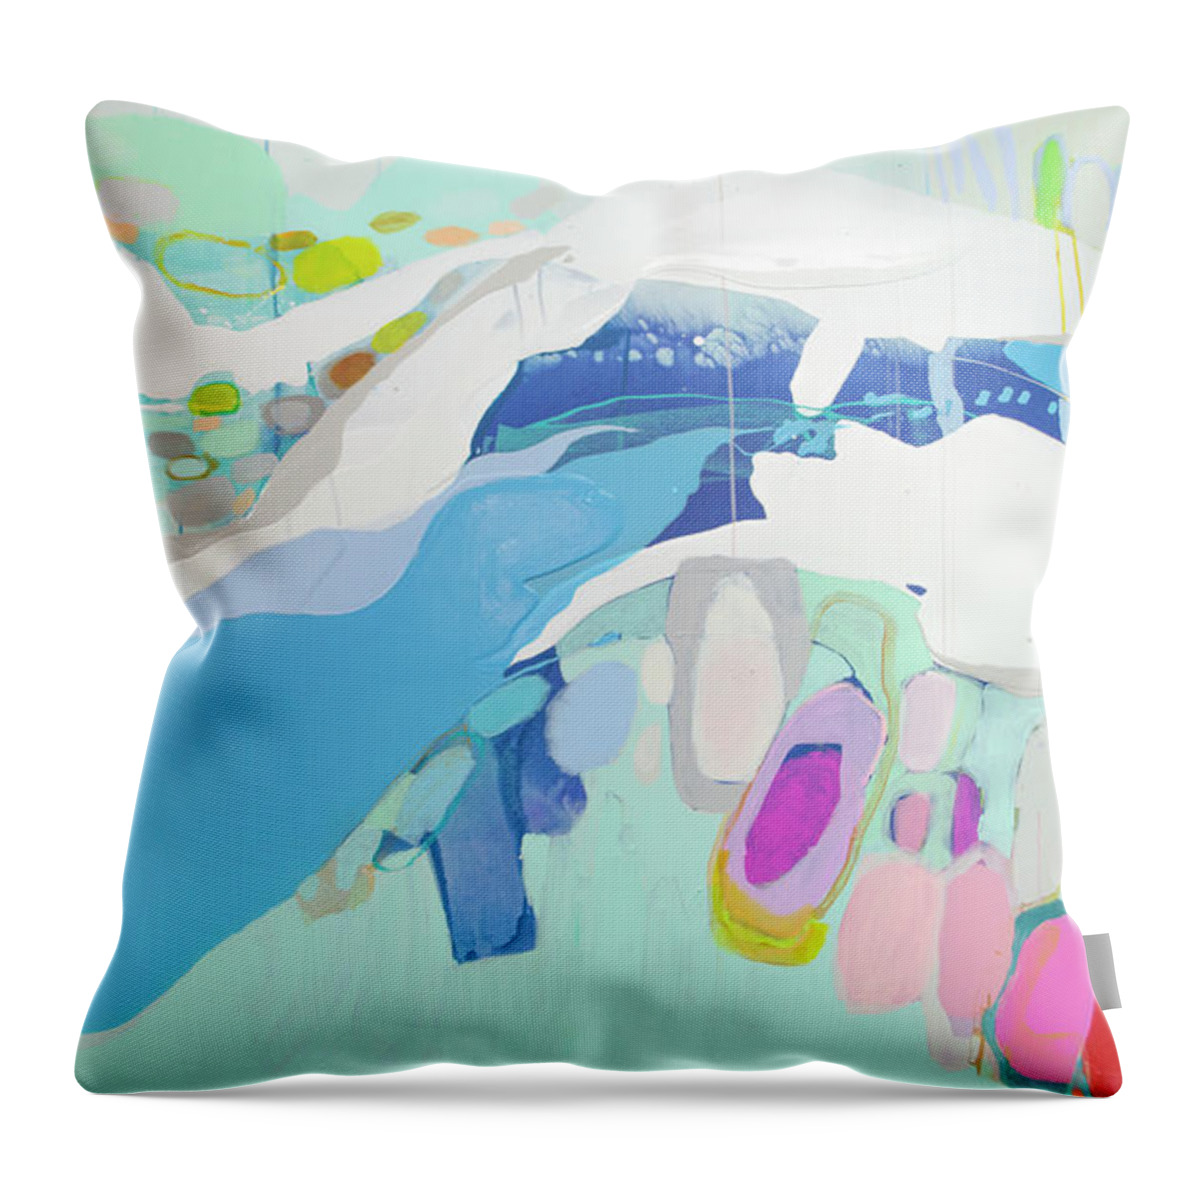 Abstract Throw Pillow featuring the painting Not Myself by Claire Desjardins